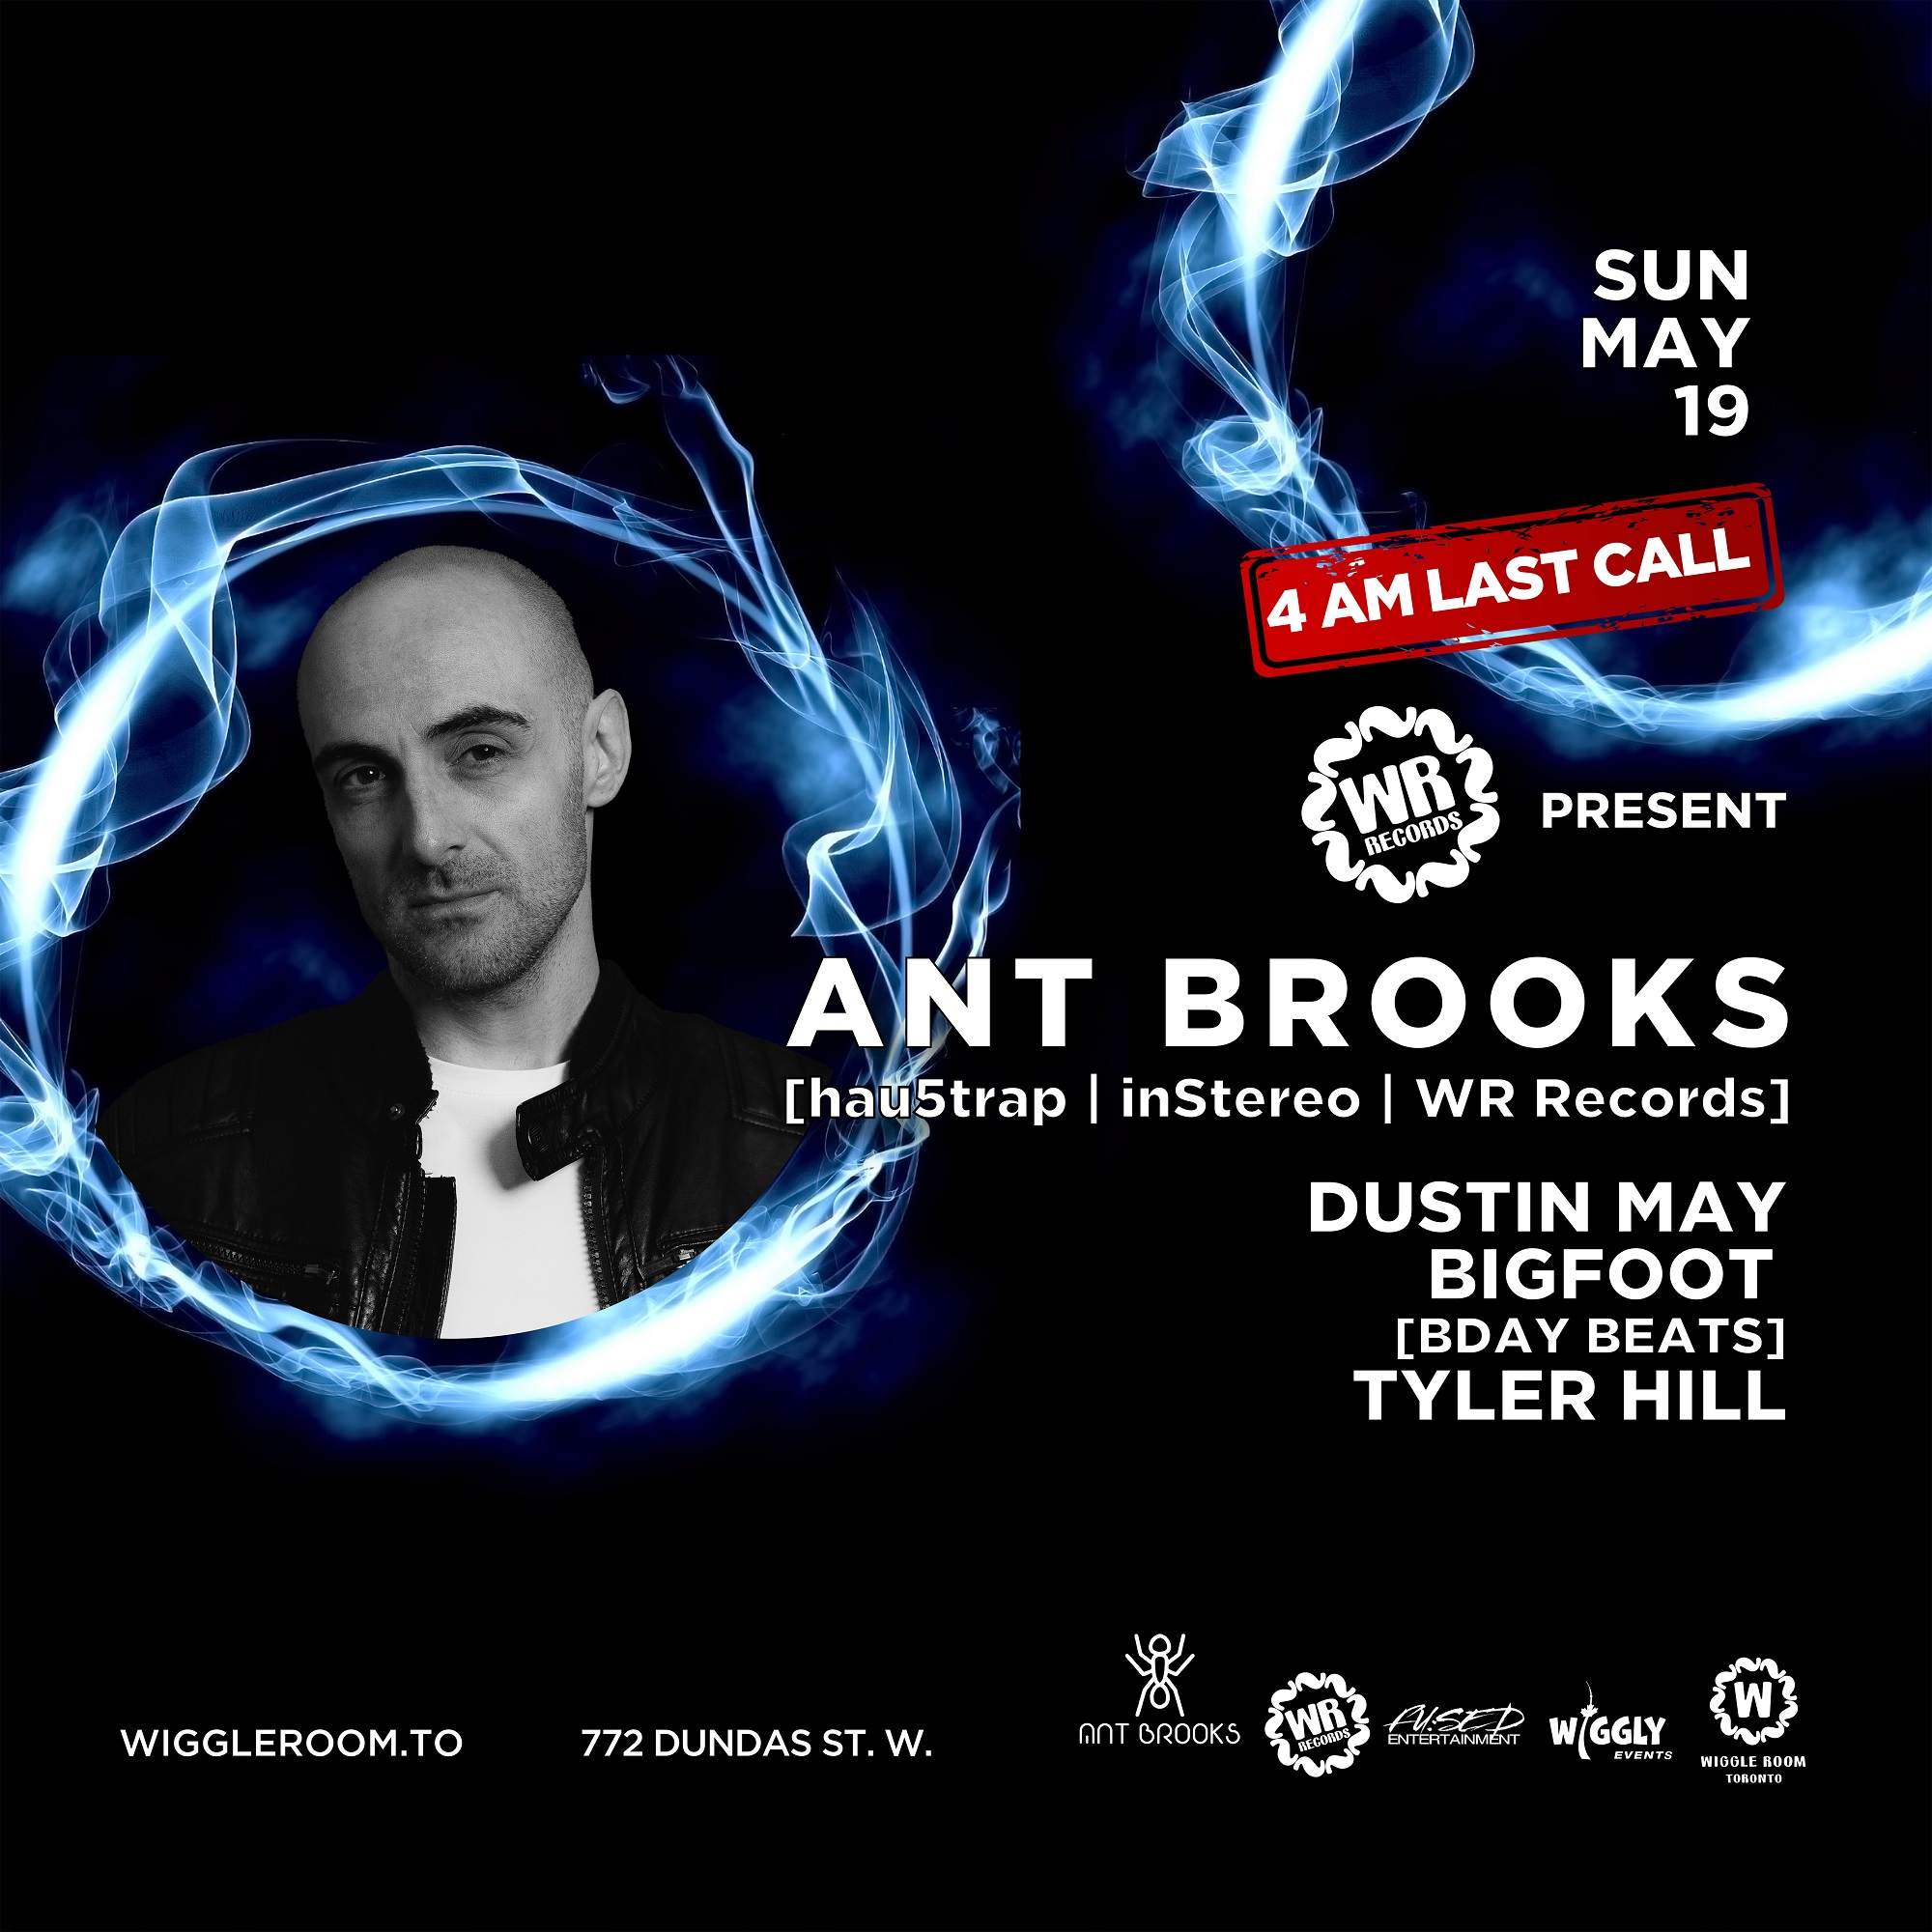 WR Records: Ant Brooks | 4AM LAST CALL - FREE ENTRY with EP Purchase - Página trasera